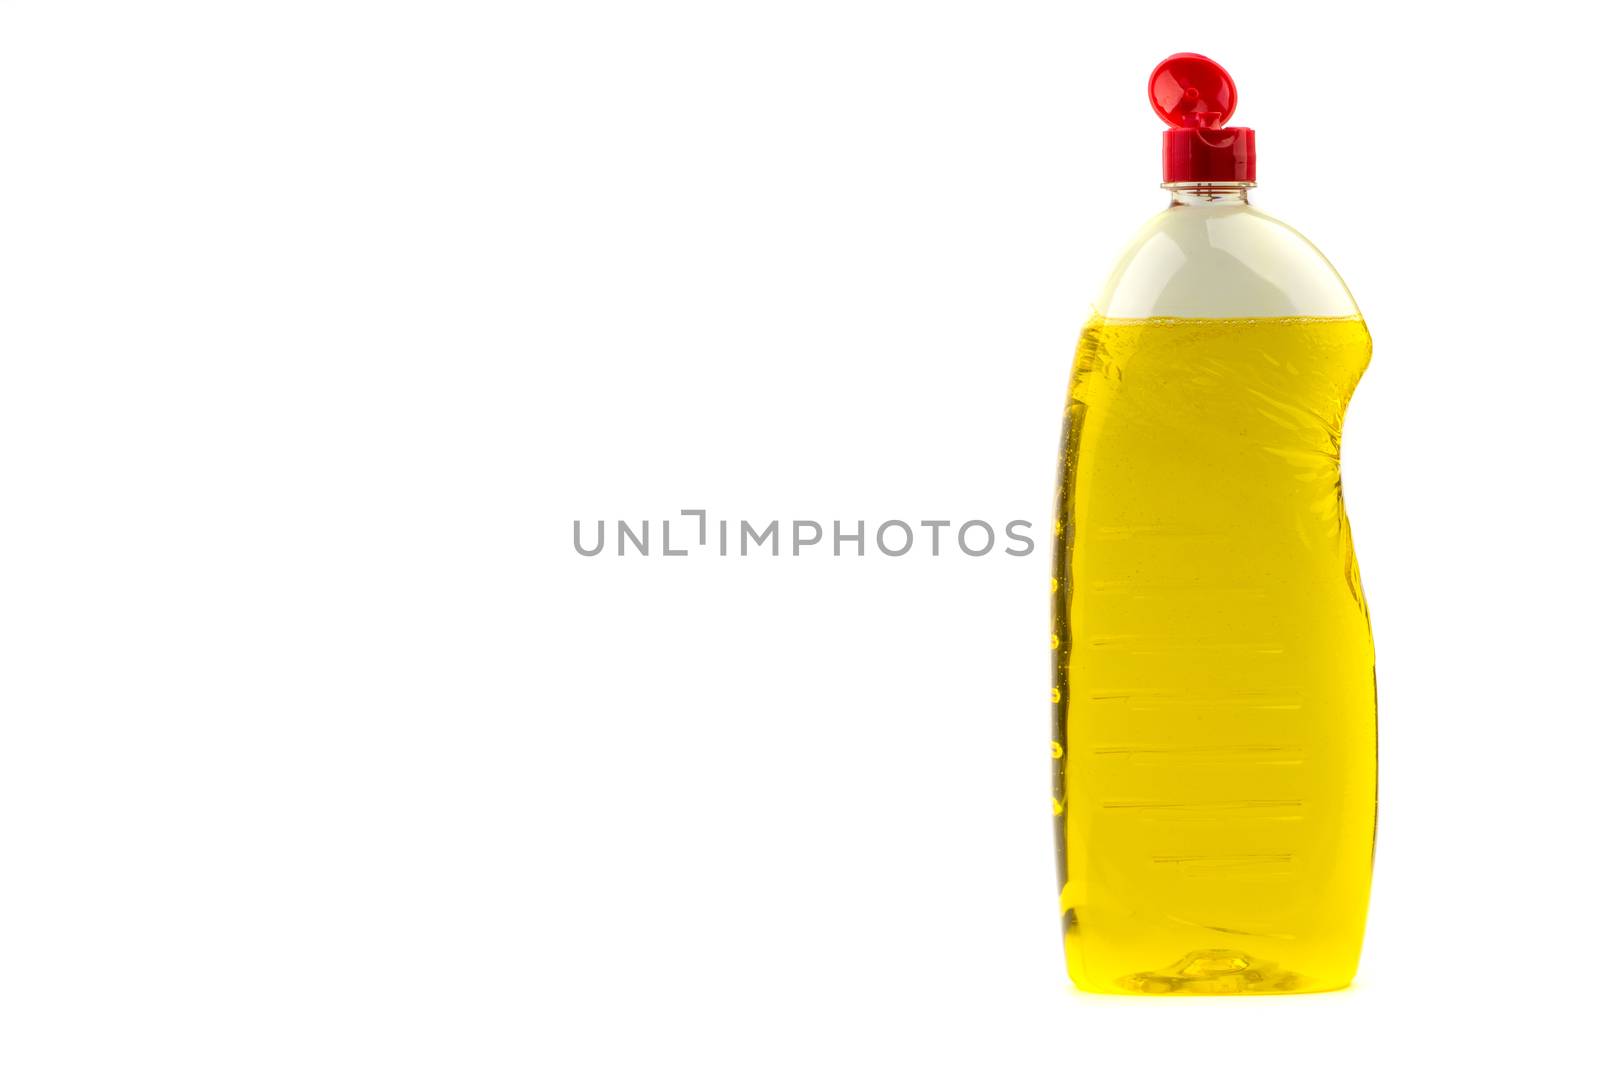 Dishwashing liquid detergent or soap in plastic bottle isolated on white background by silverwings